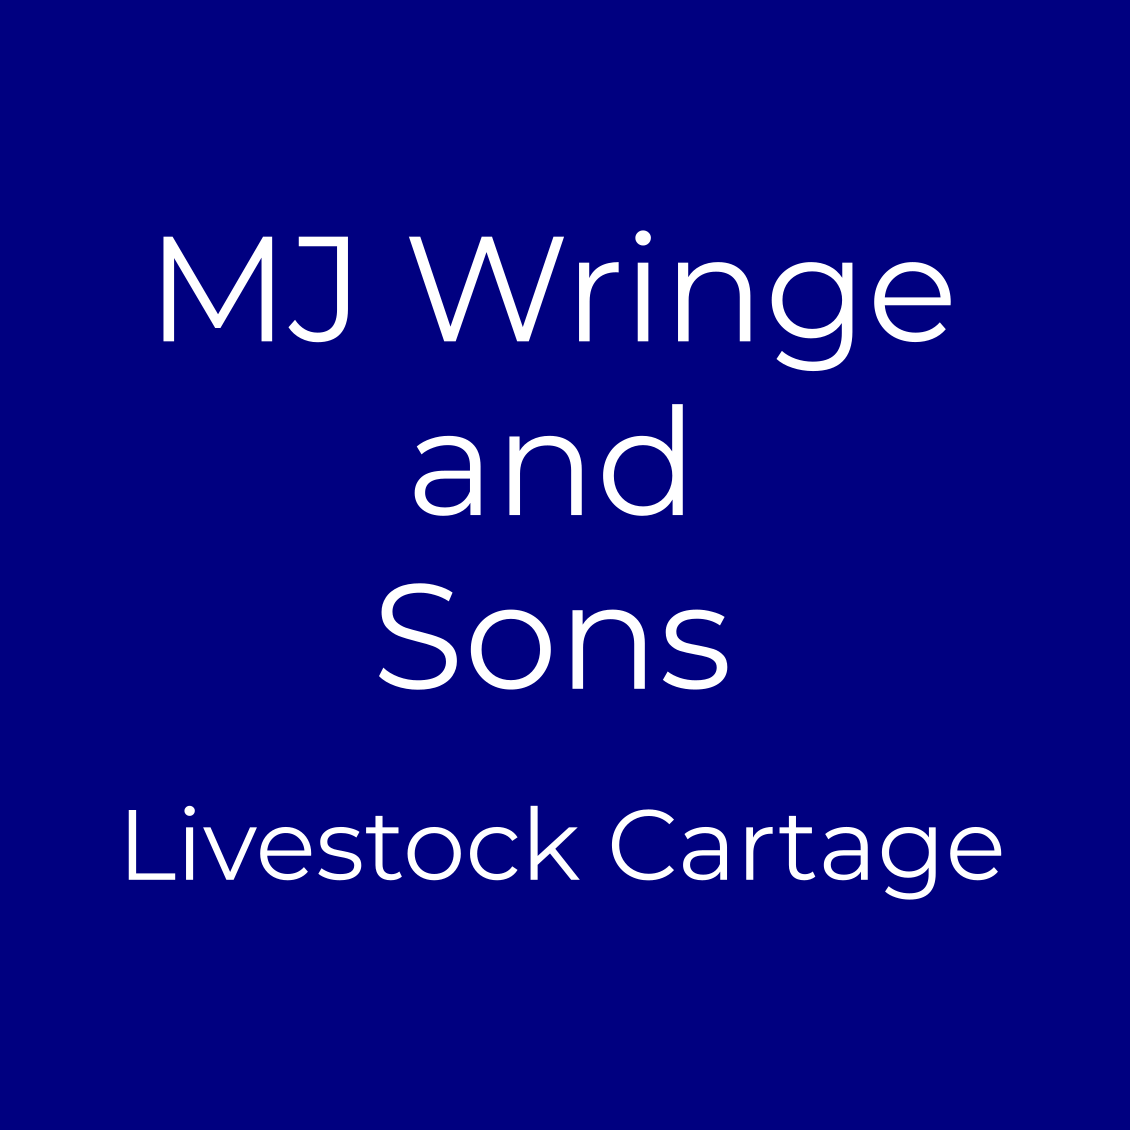 Shop Local MJ Wringe and Sons